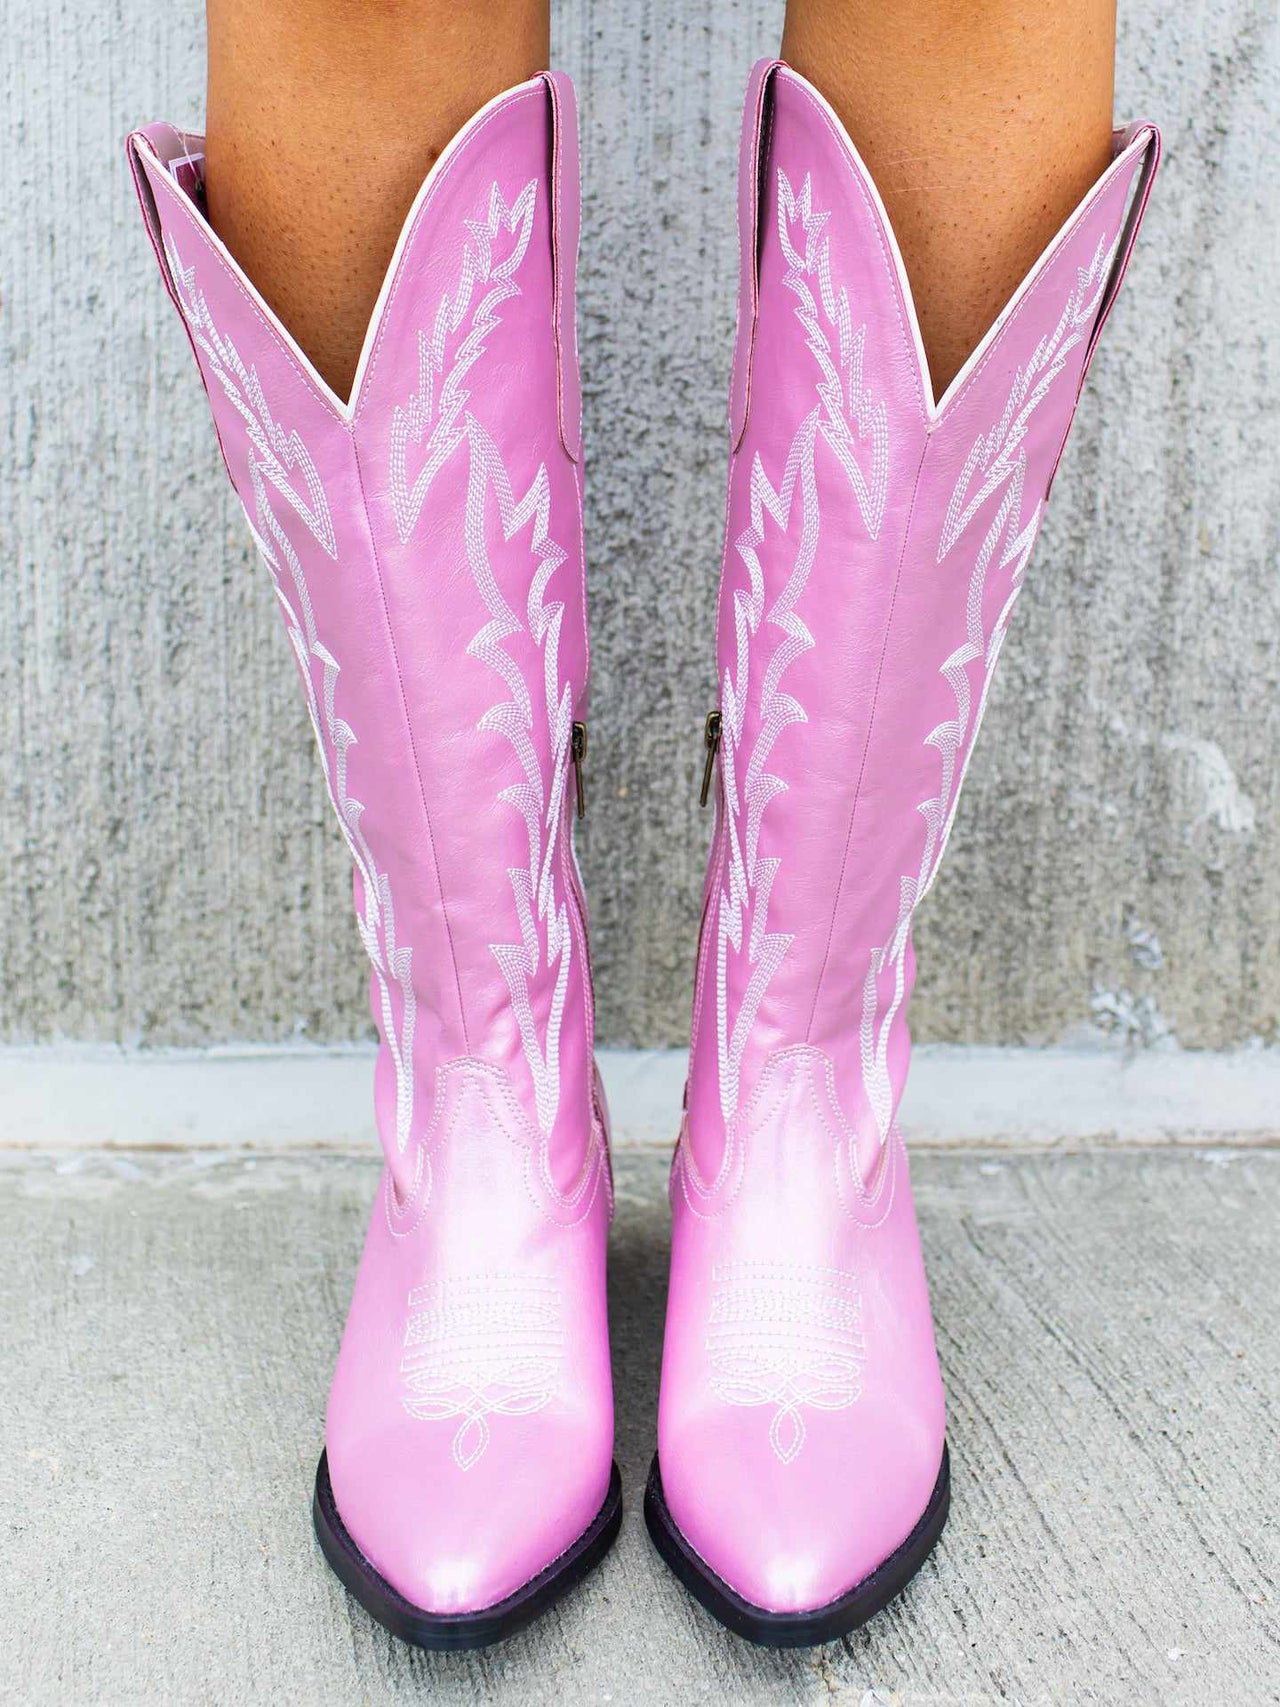 Iridescent pink western boots.